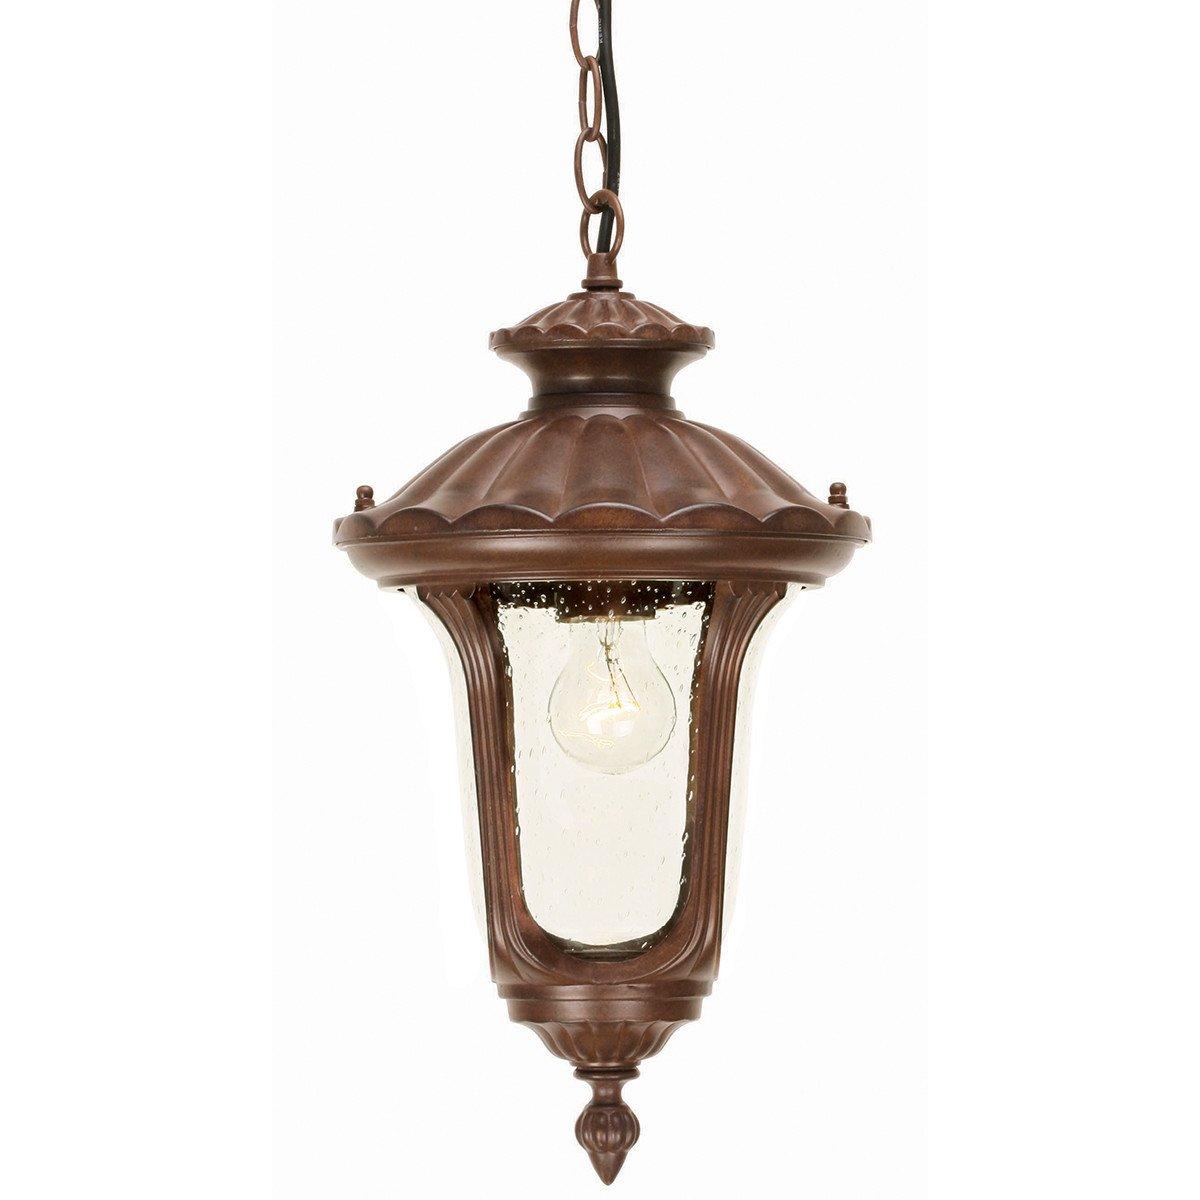 Chicago 1 Light Small Outdoor Ceiling Chain Lantern Rusty Bronze Patina IP44 E27